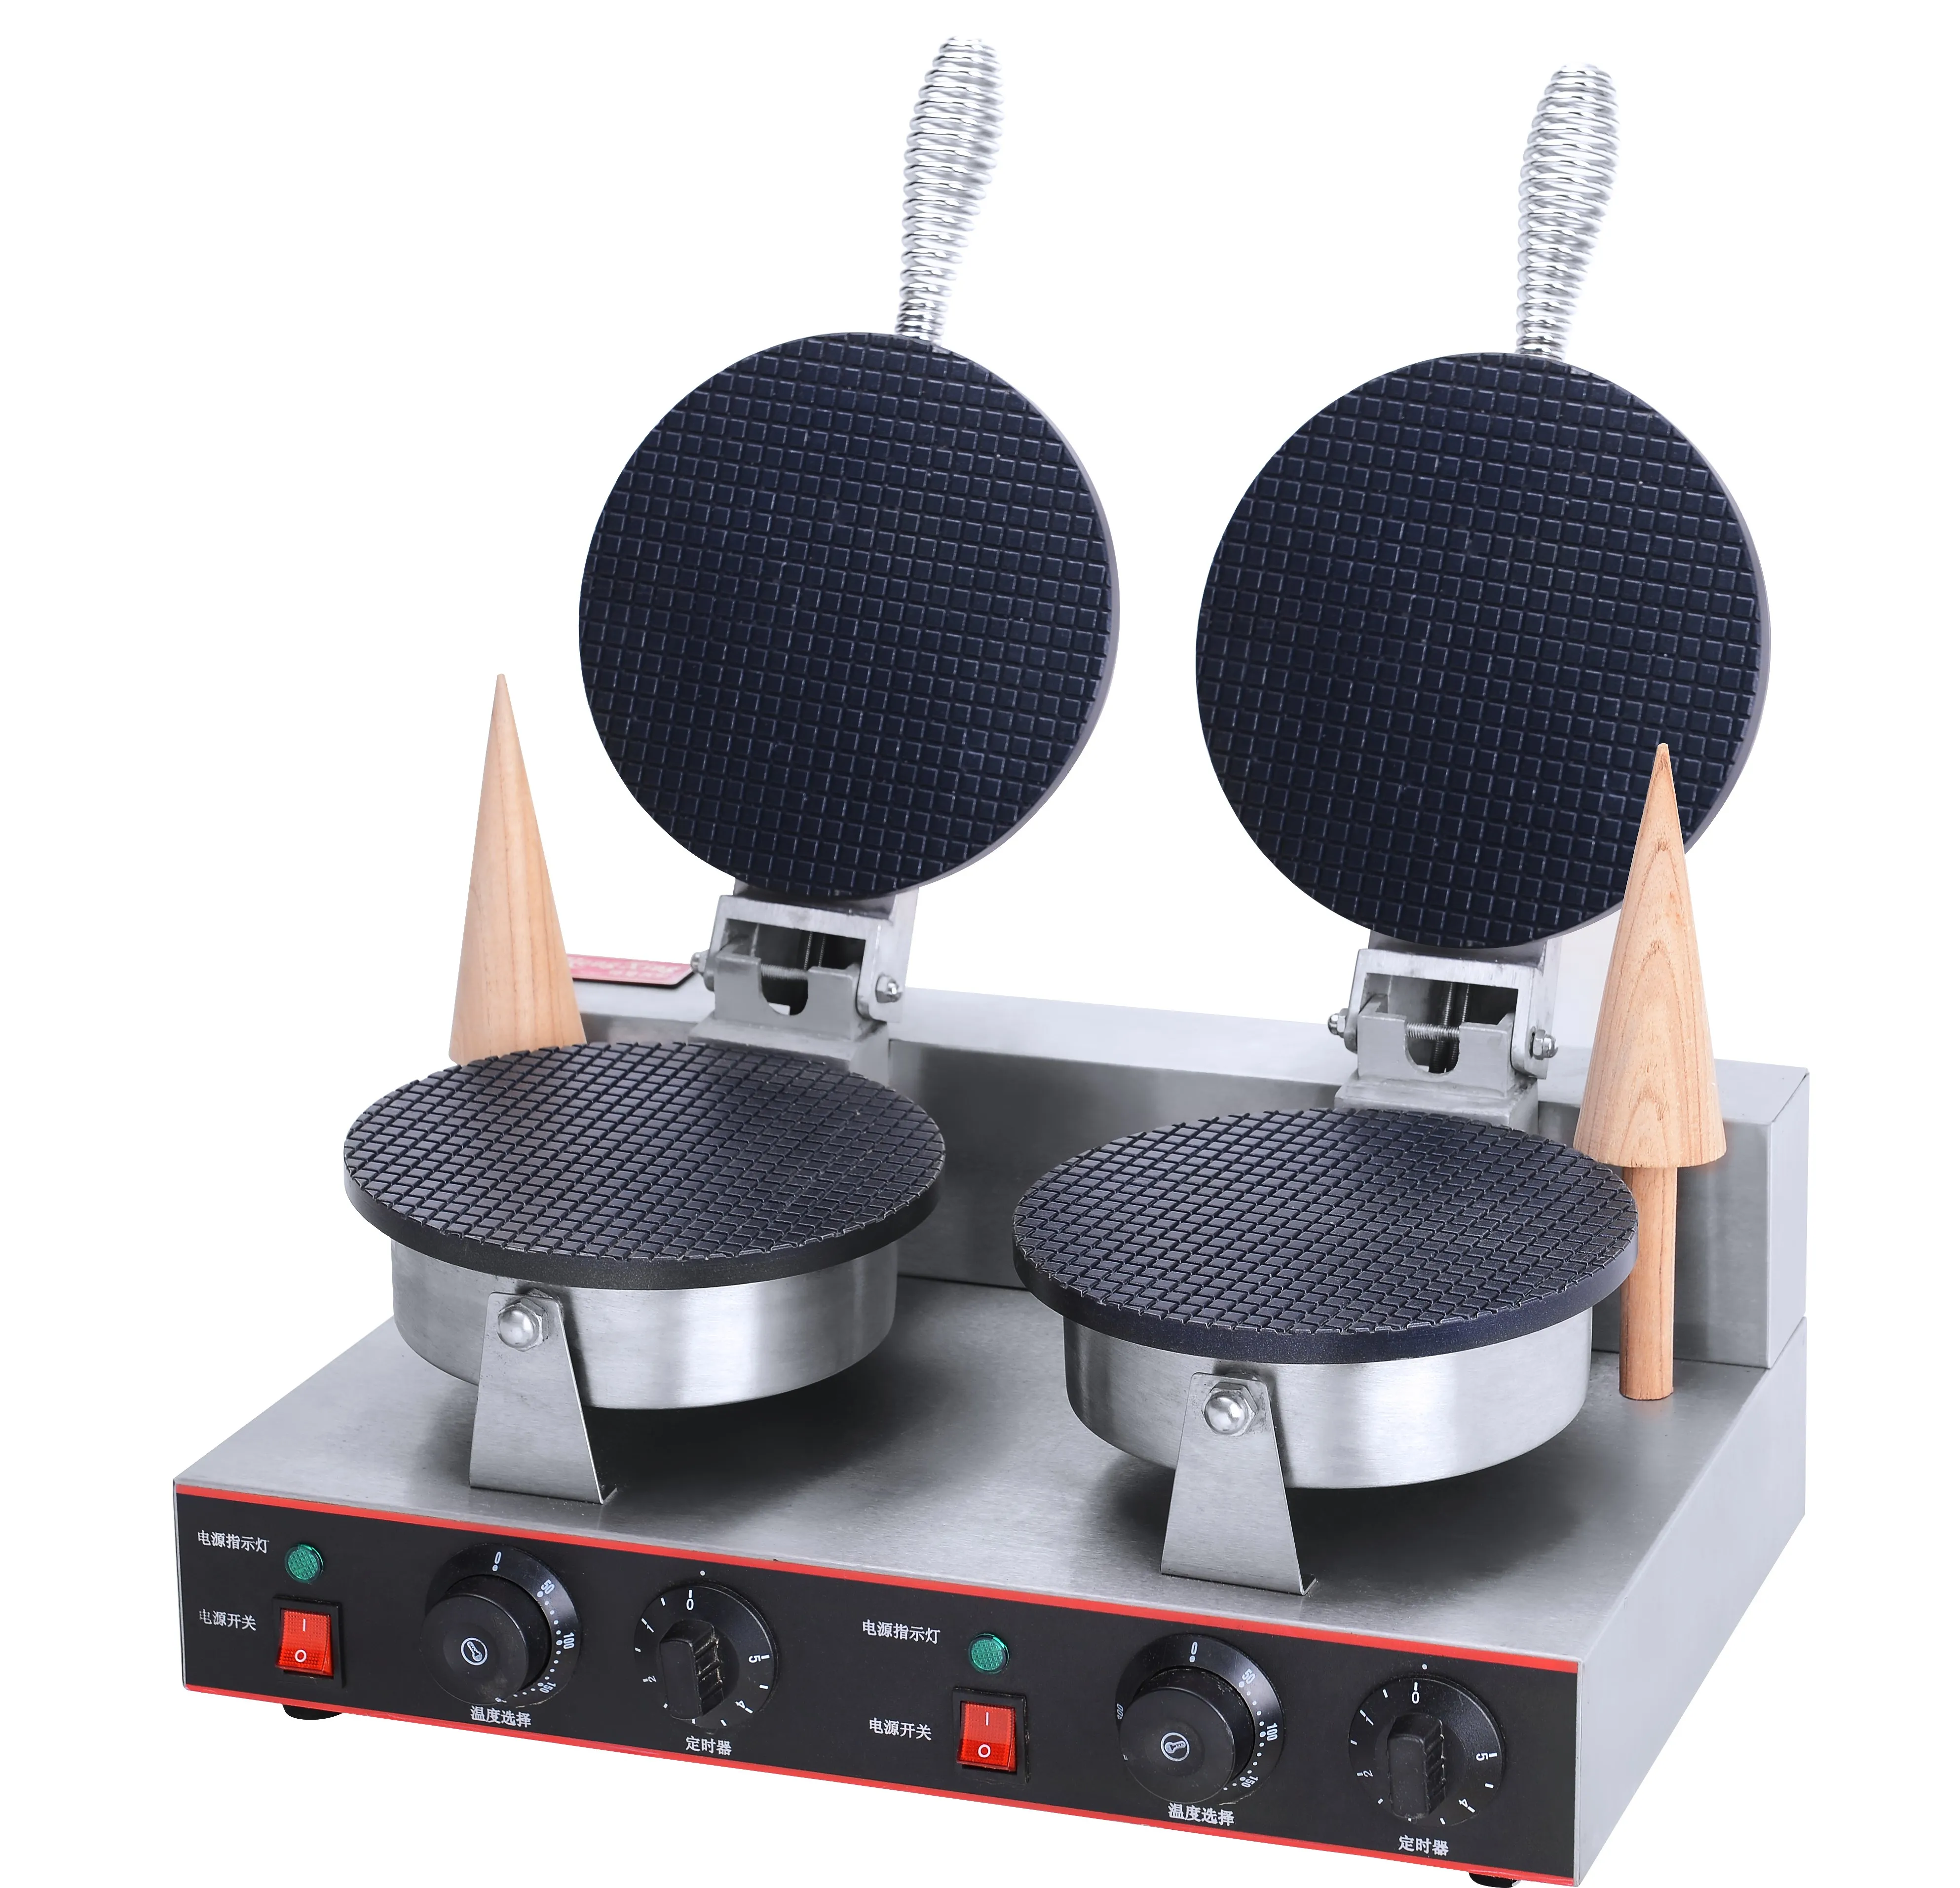 Cheap Price Commercial Electric Waffle Baker For Sale,Stainless Steel Waffle Cone Baker